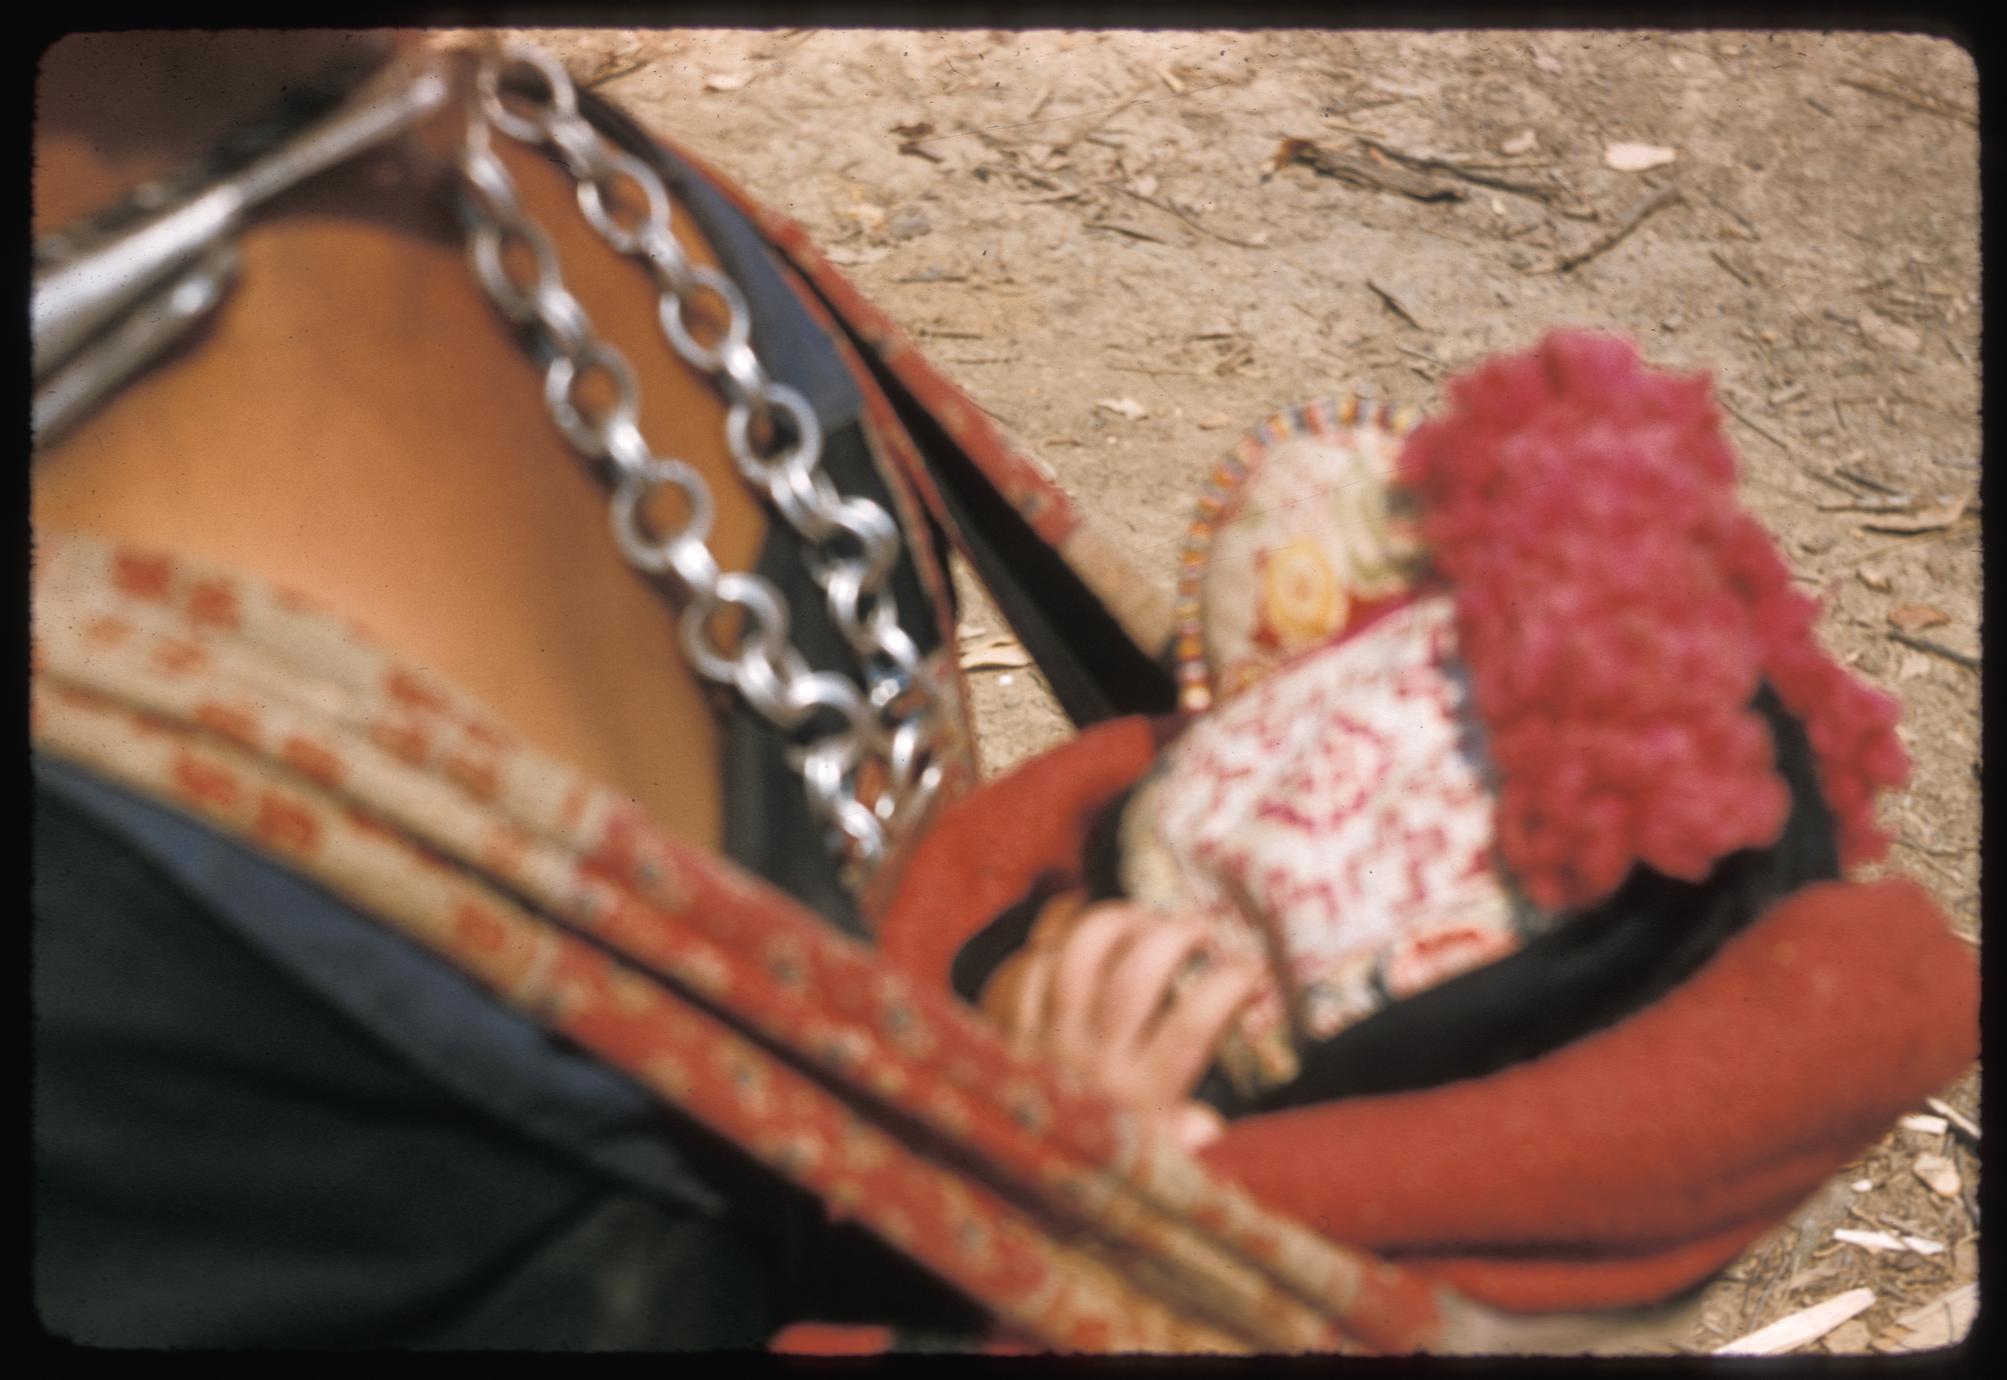 Hmong (Meo) spectator with baby